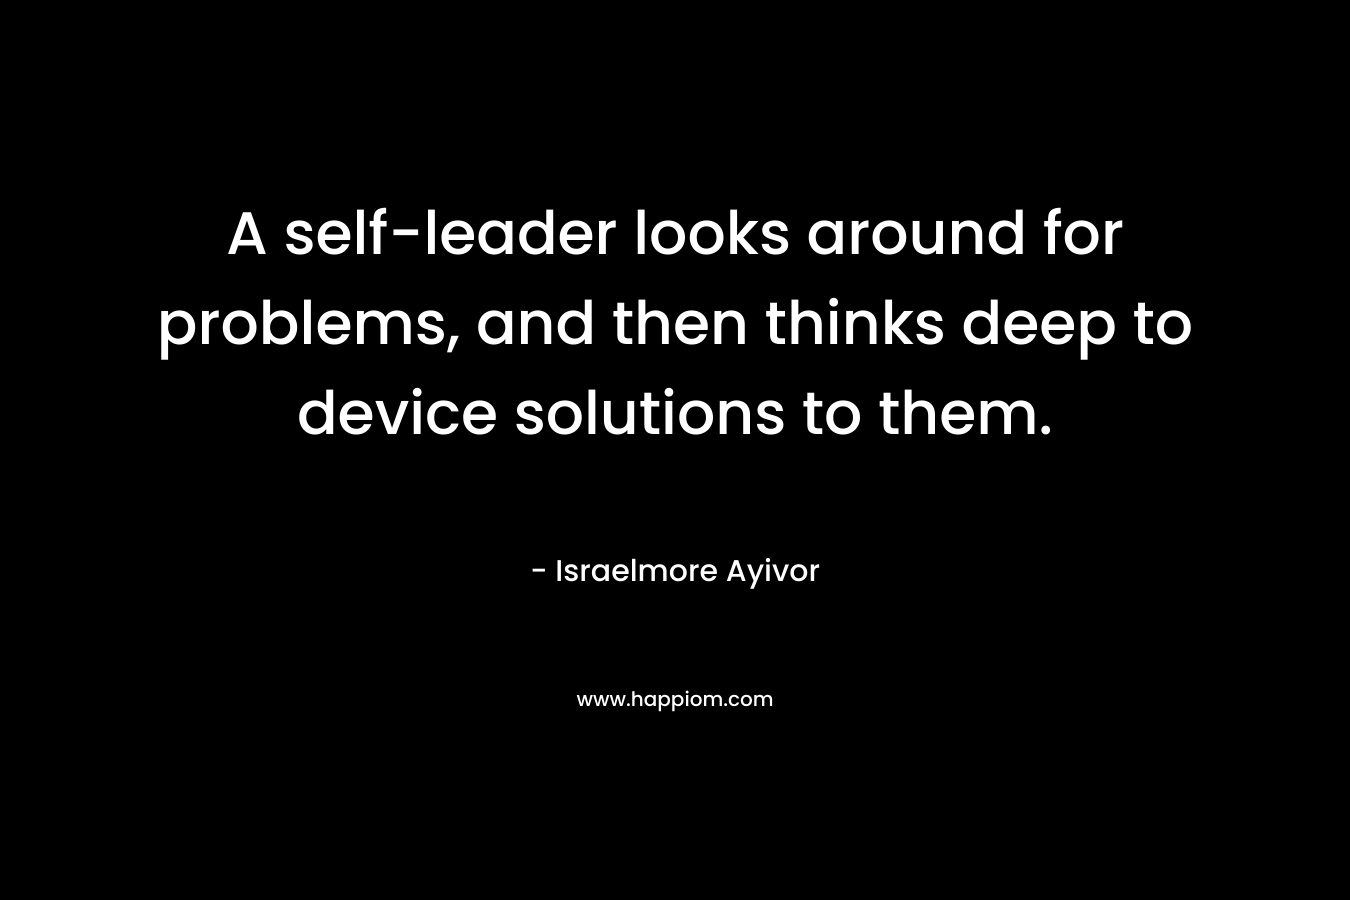 A self-leader looks around for problems, and then thinks deep to device solutions to them.